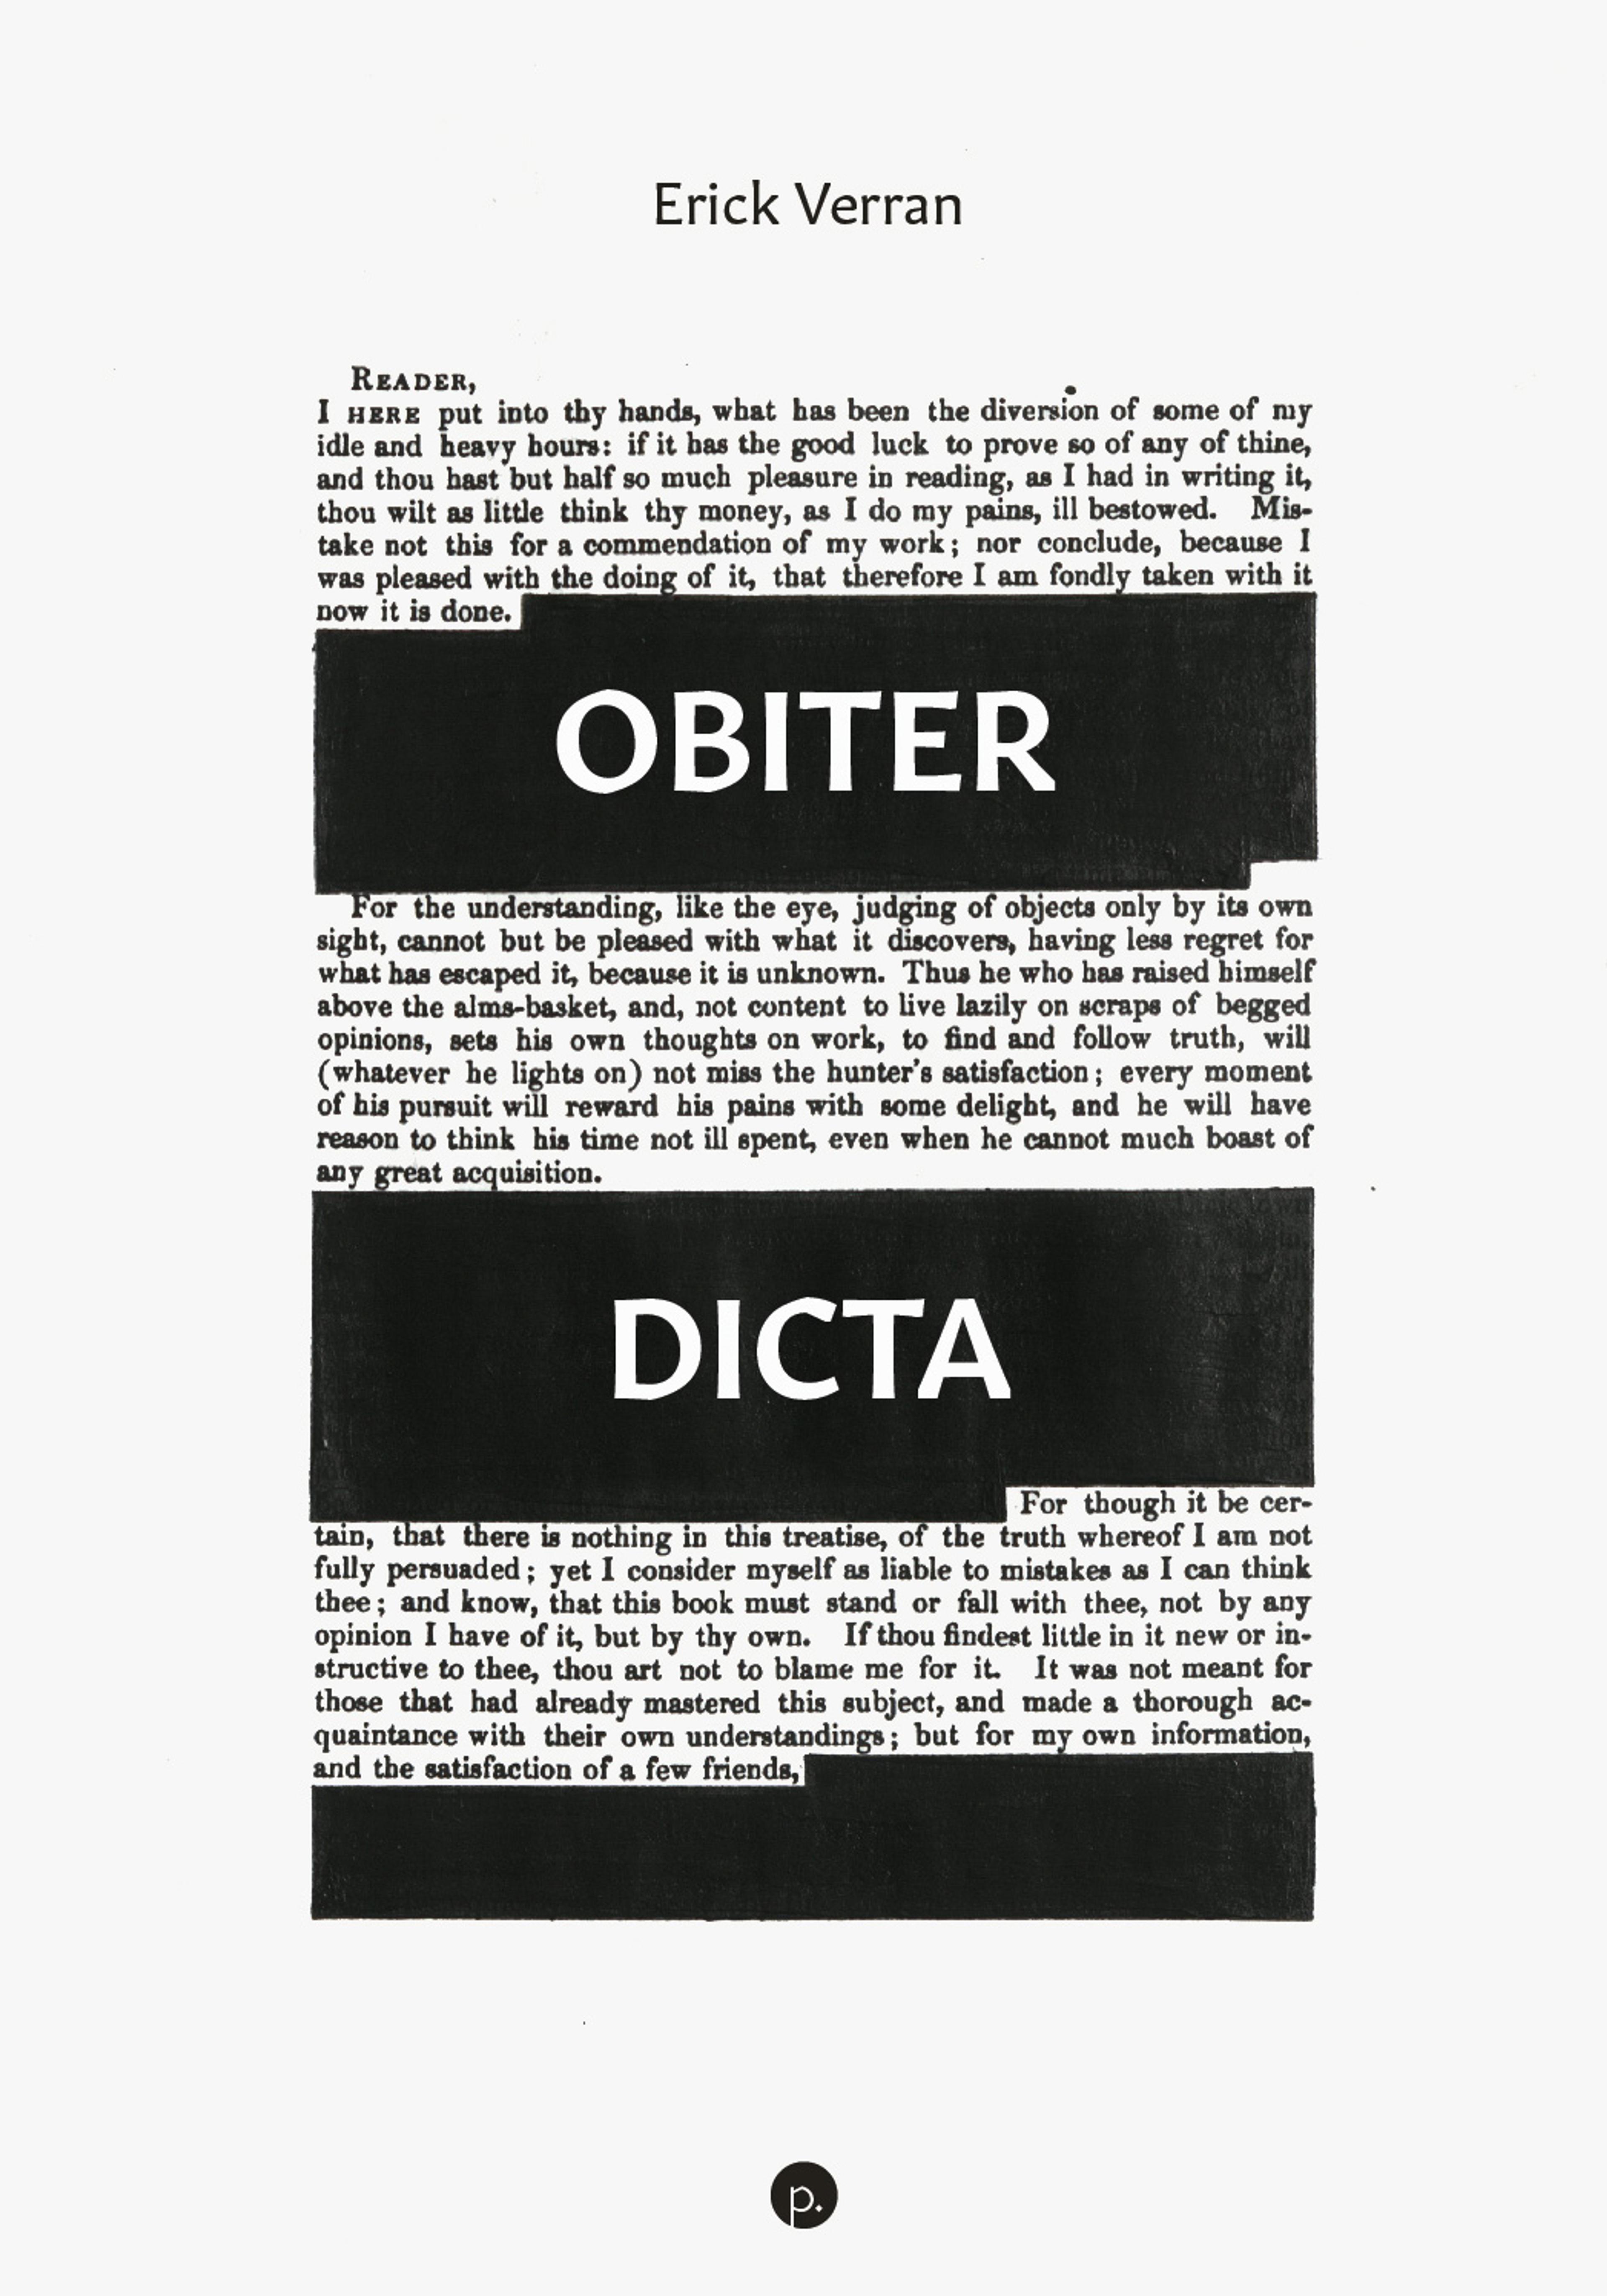 Cover of book titled Obiter Dicta